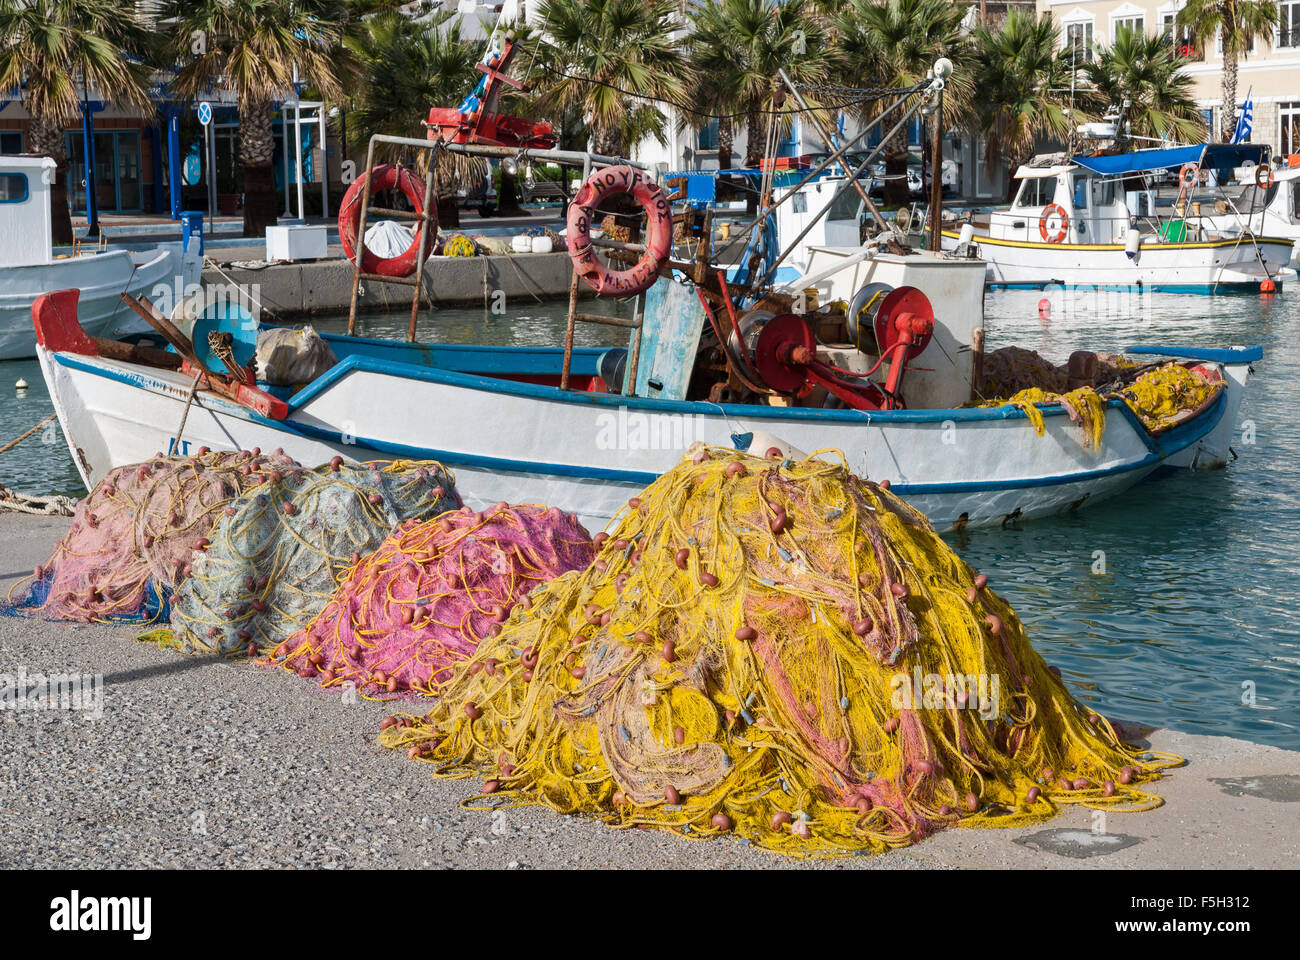 Traditional wooden boats and fishing nets in the harbor on October 12, 2013 in Kos island, Greece. Stock Photo